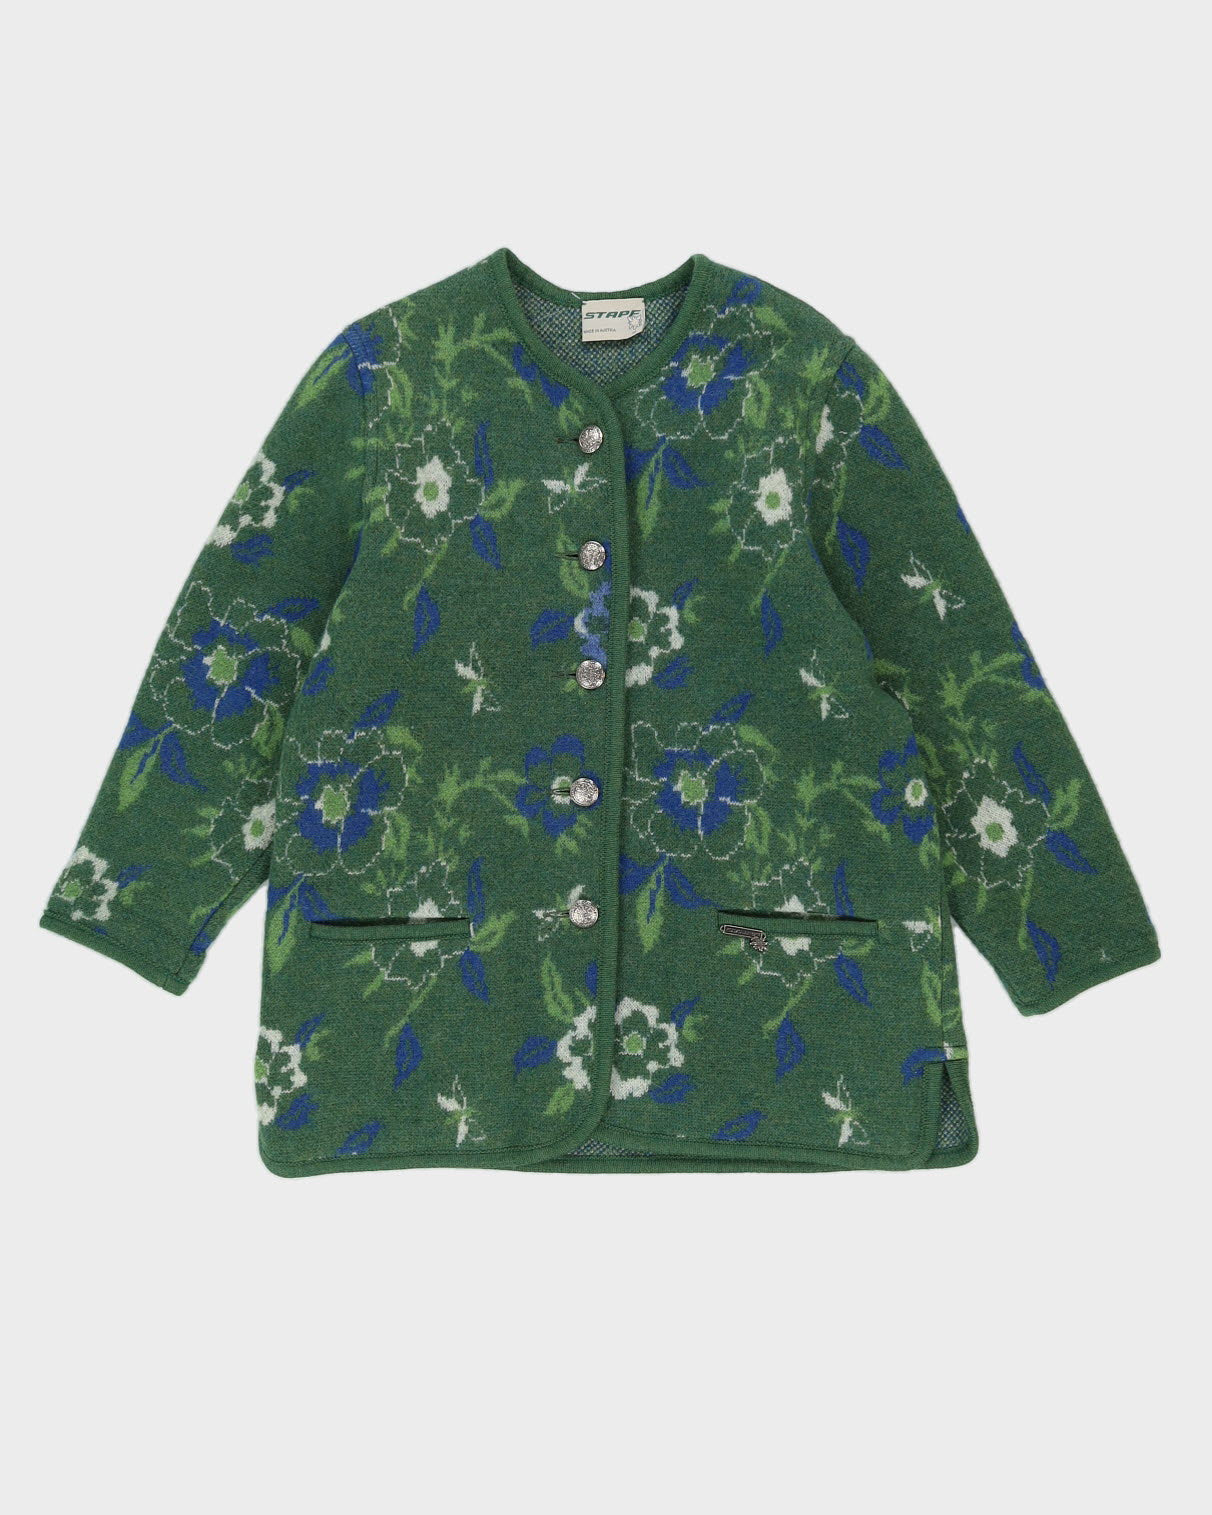 00s Austrian Green Floral Knitted Cardigan - M